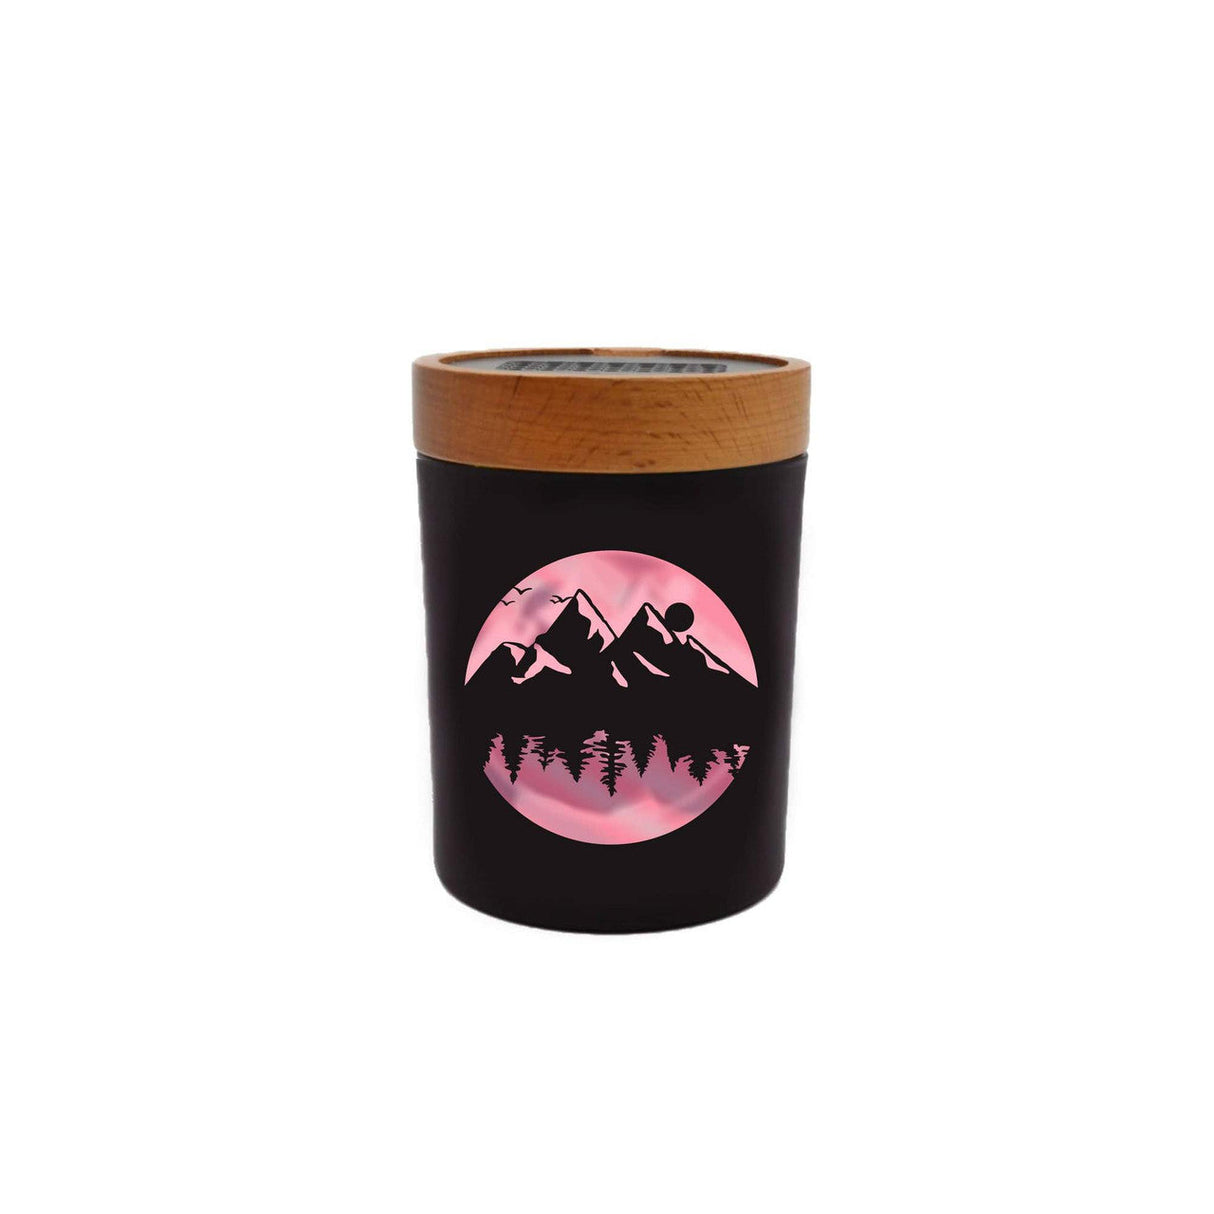 V Syndicate Smart Stash Jar Small in High Elevation Pink with Wood Lid - Front View